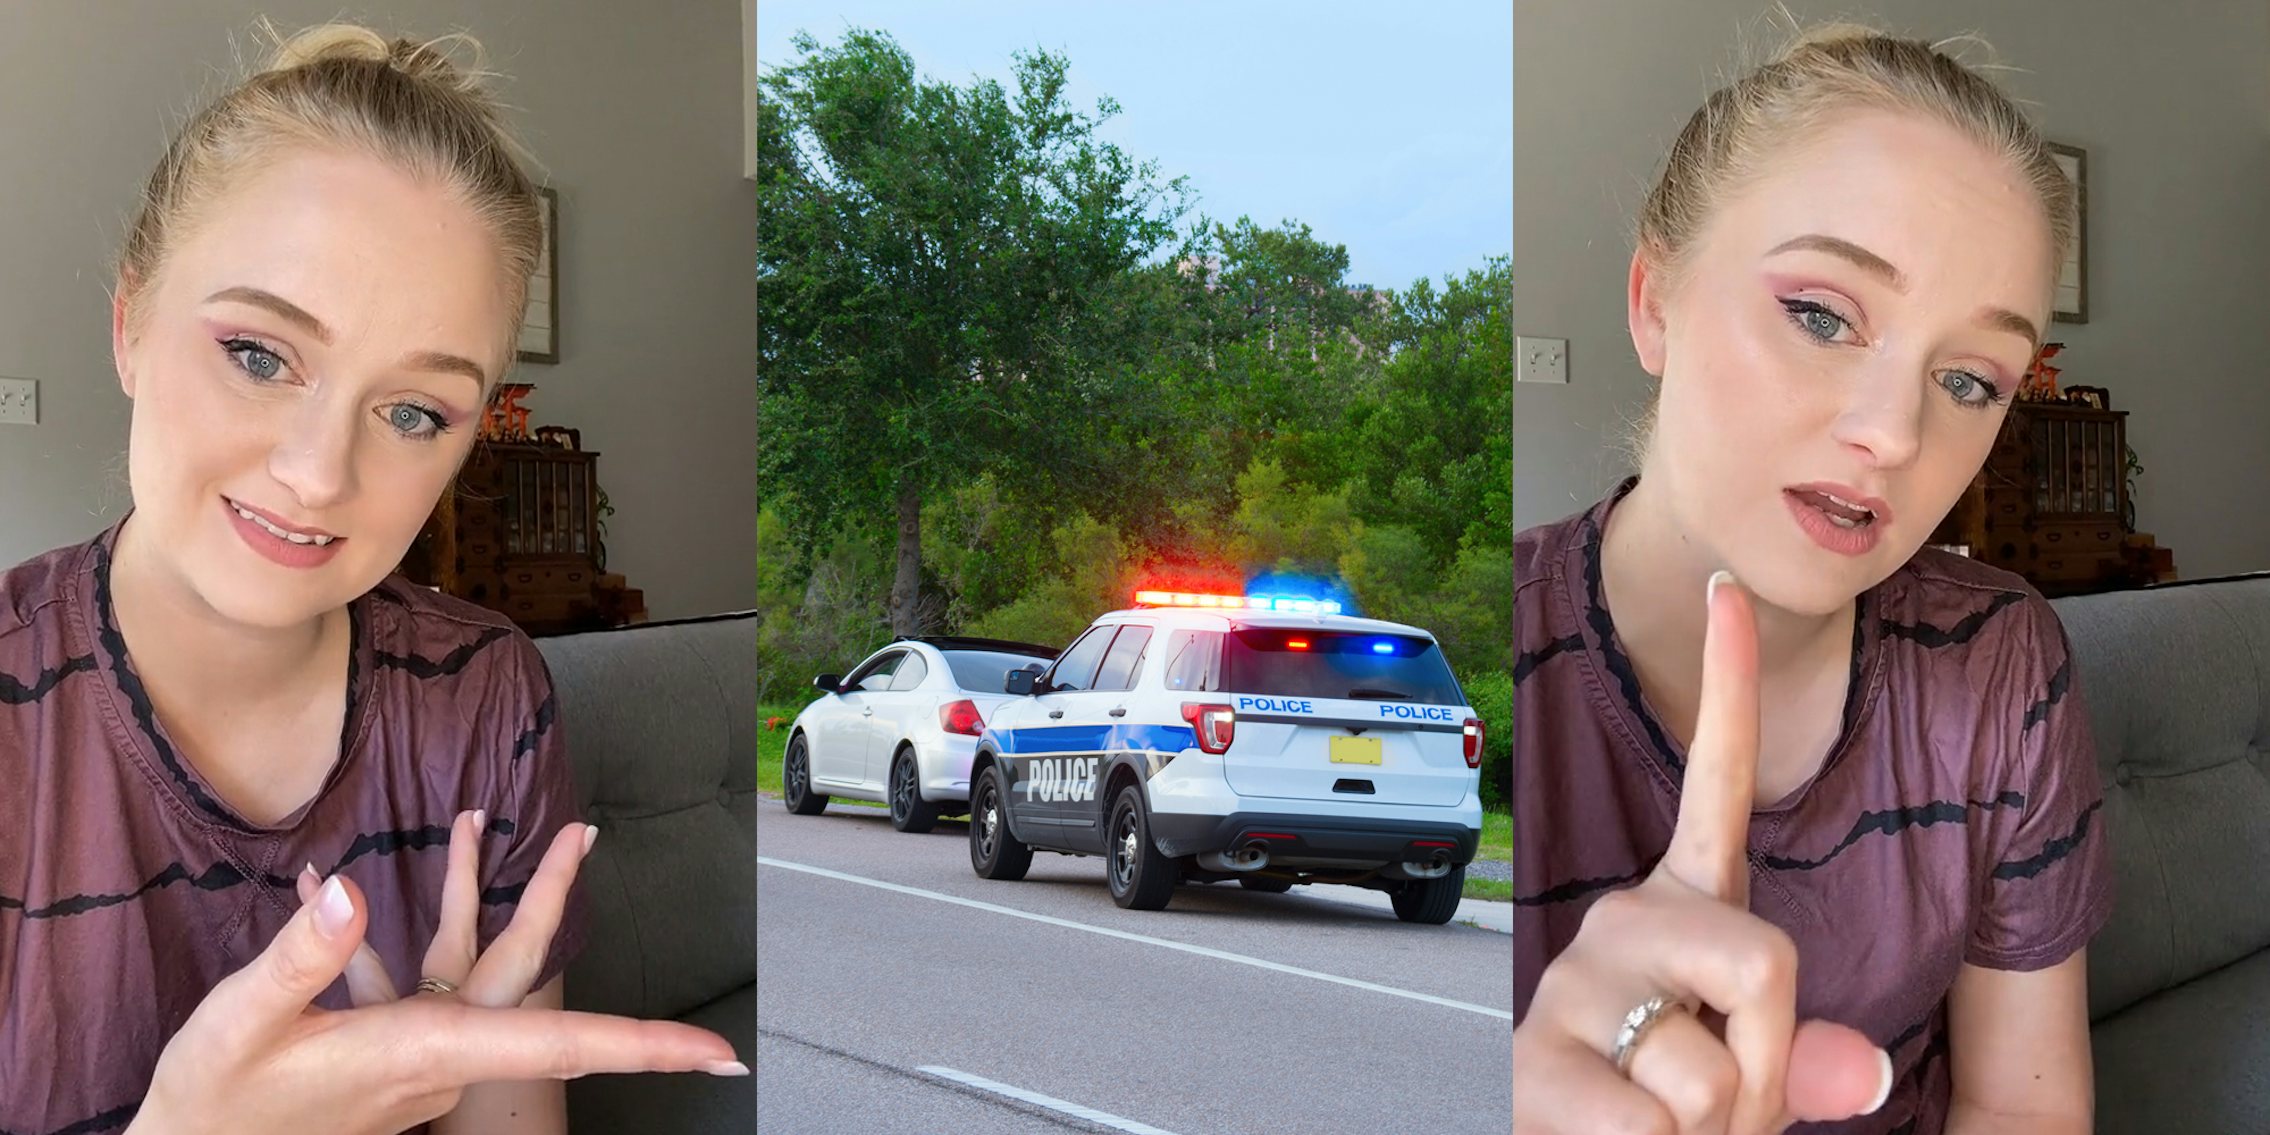 woman speaking with hand pointing right (l) Police with flashing lights pulled over car (c) woman speaking with finger up (r)